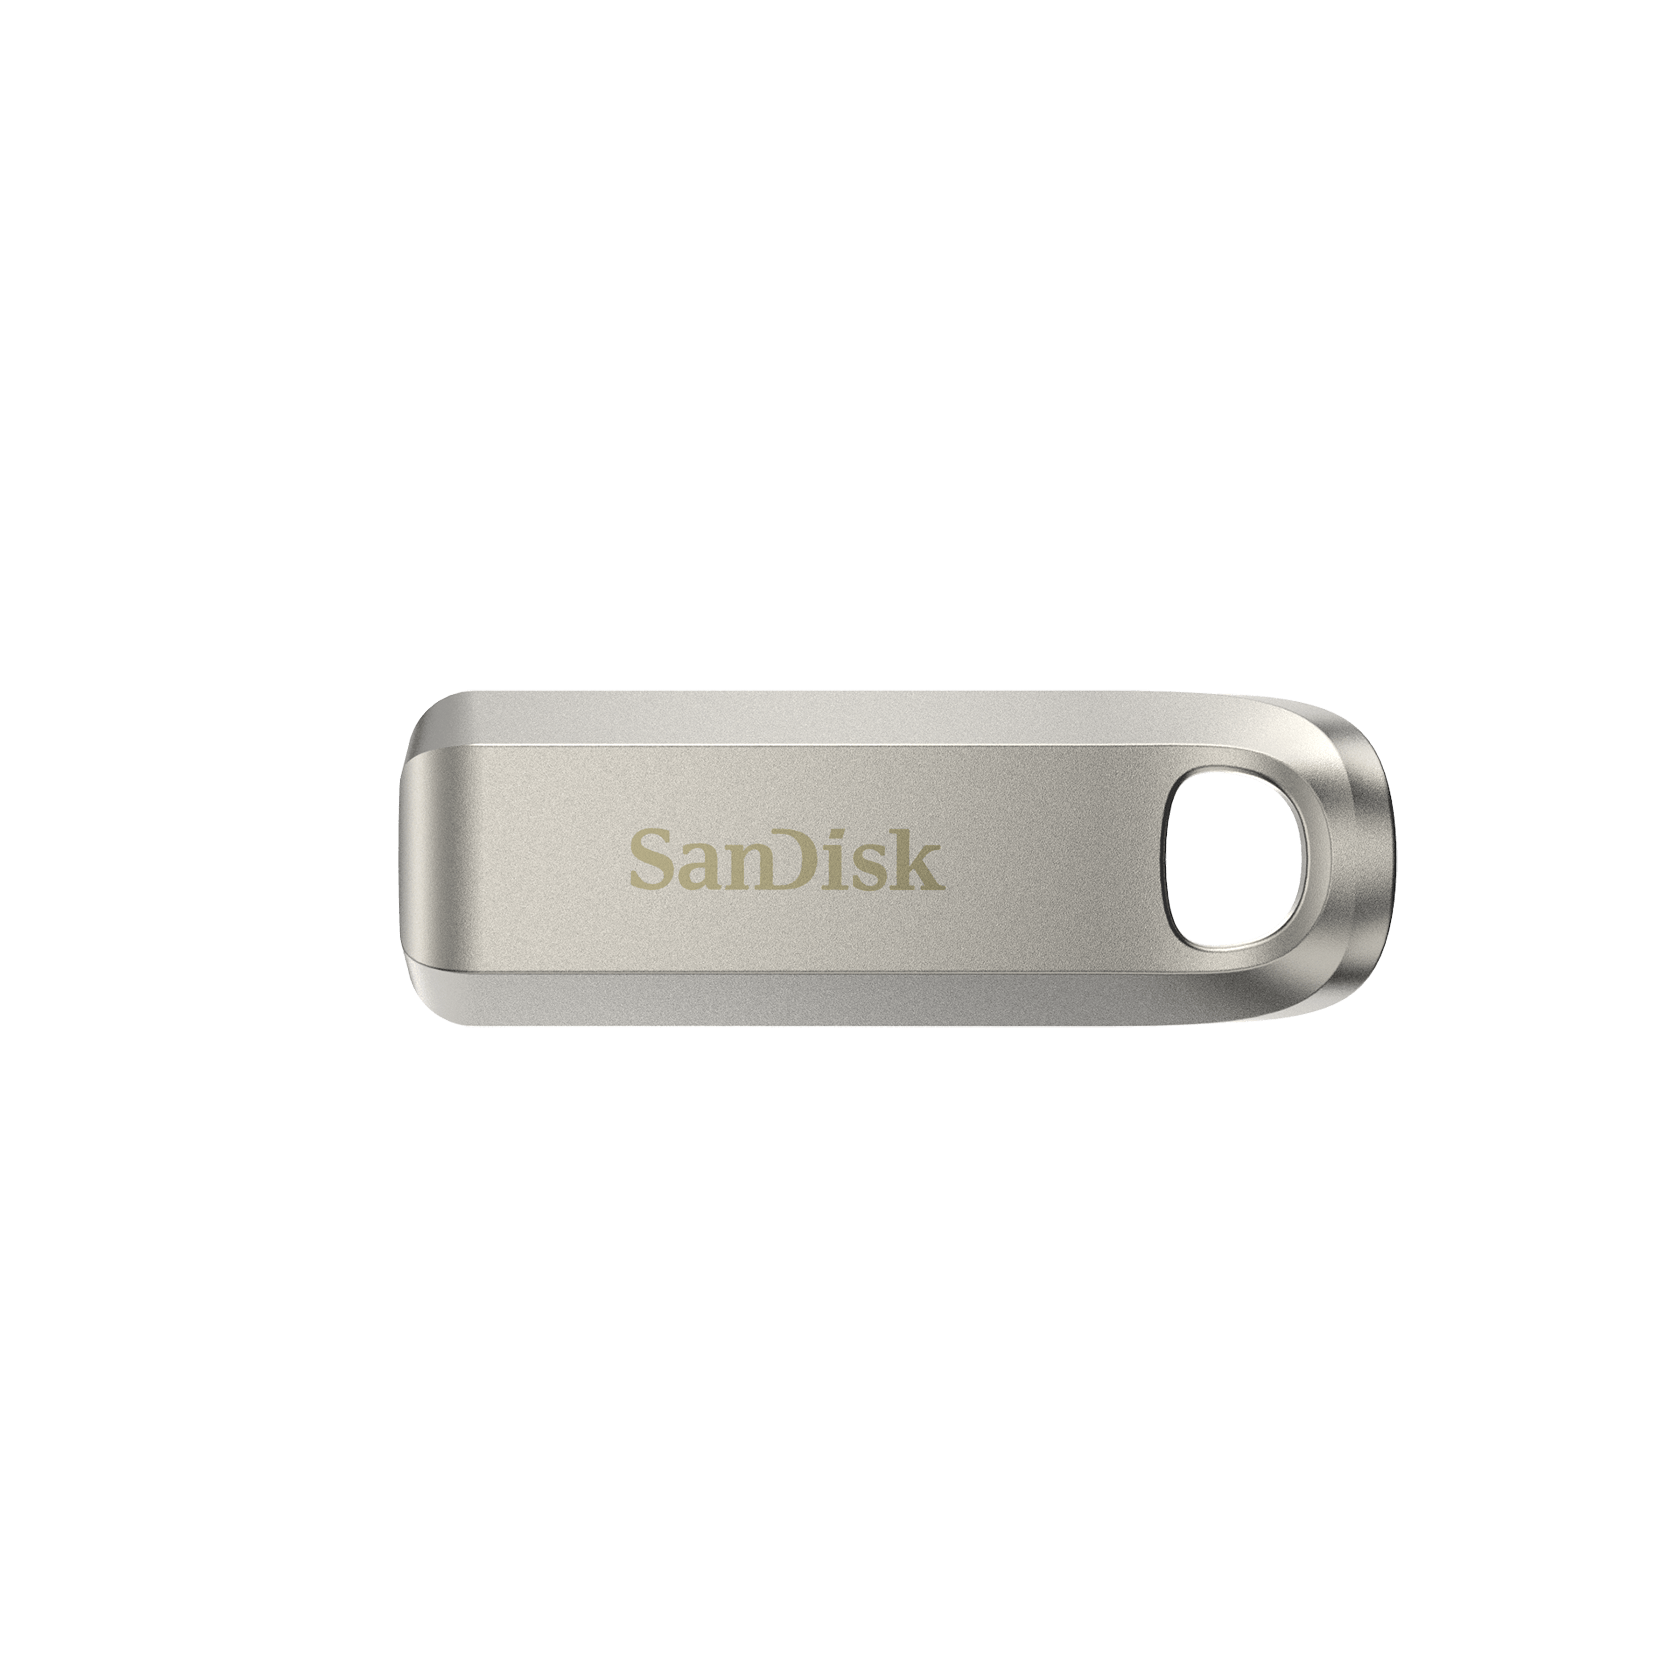 SanDisk Ultra Luxe USB Type-C Drive - 128GB - SDCZ75-128G-G46